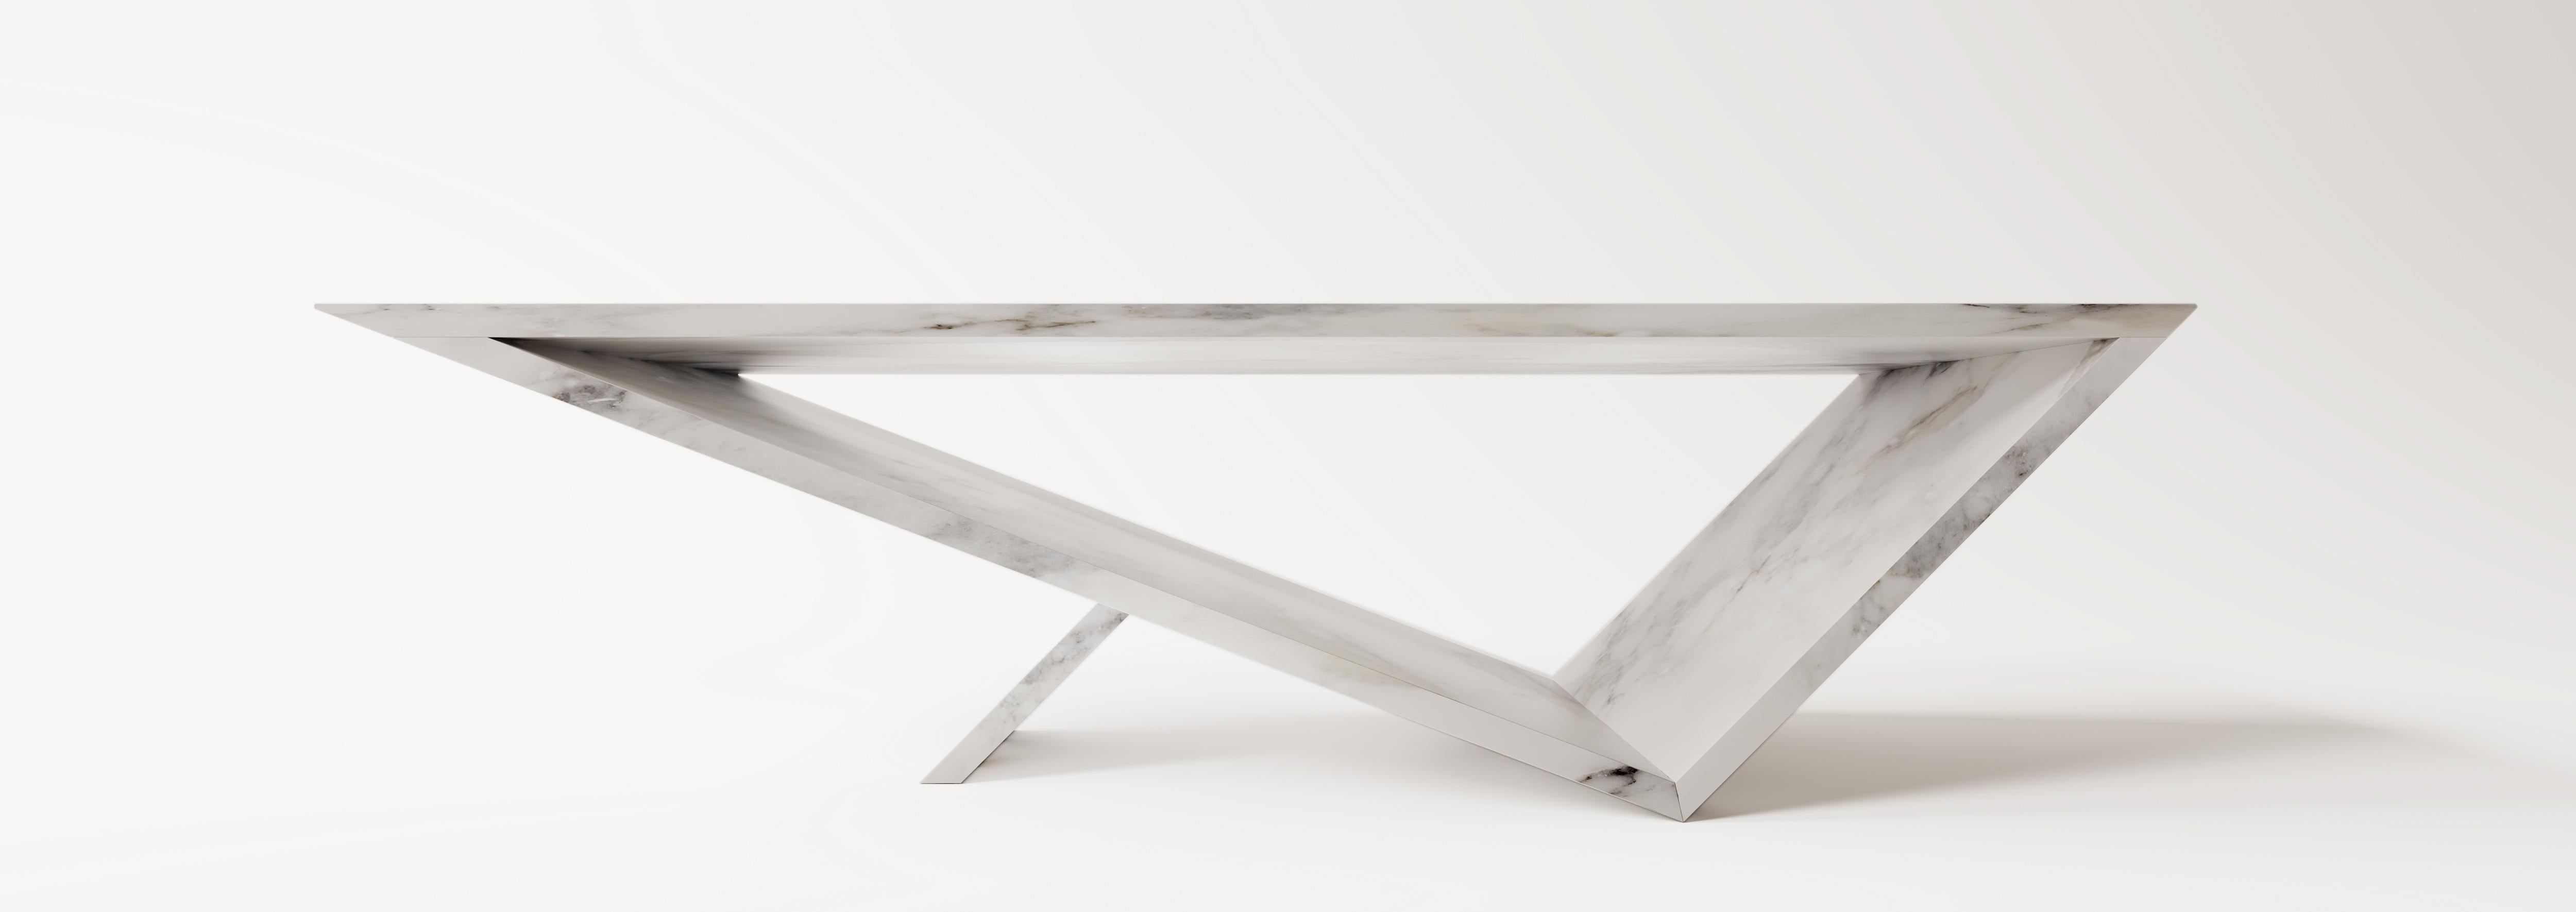 Time/space portal coffee table in Calacatta marble by Neal Aronowitz Design
Dimensions: D 167.7 x W 63.5 x H 45.7 cm
Materials: Calacatta Marble.
This table can also be made in other finishes and types of stone. Please contact us.

The